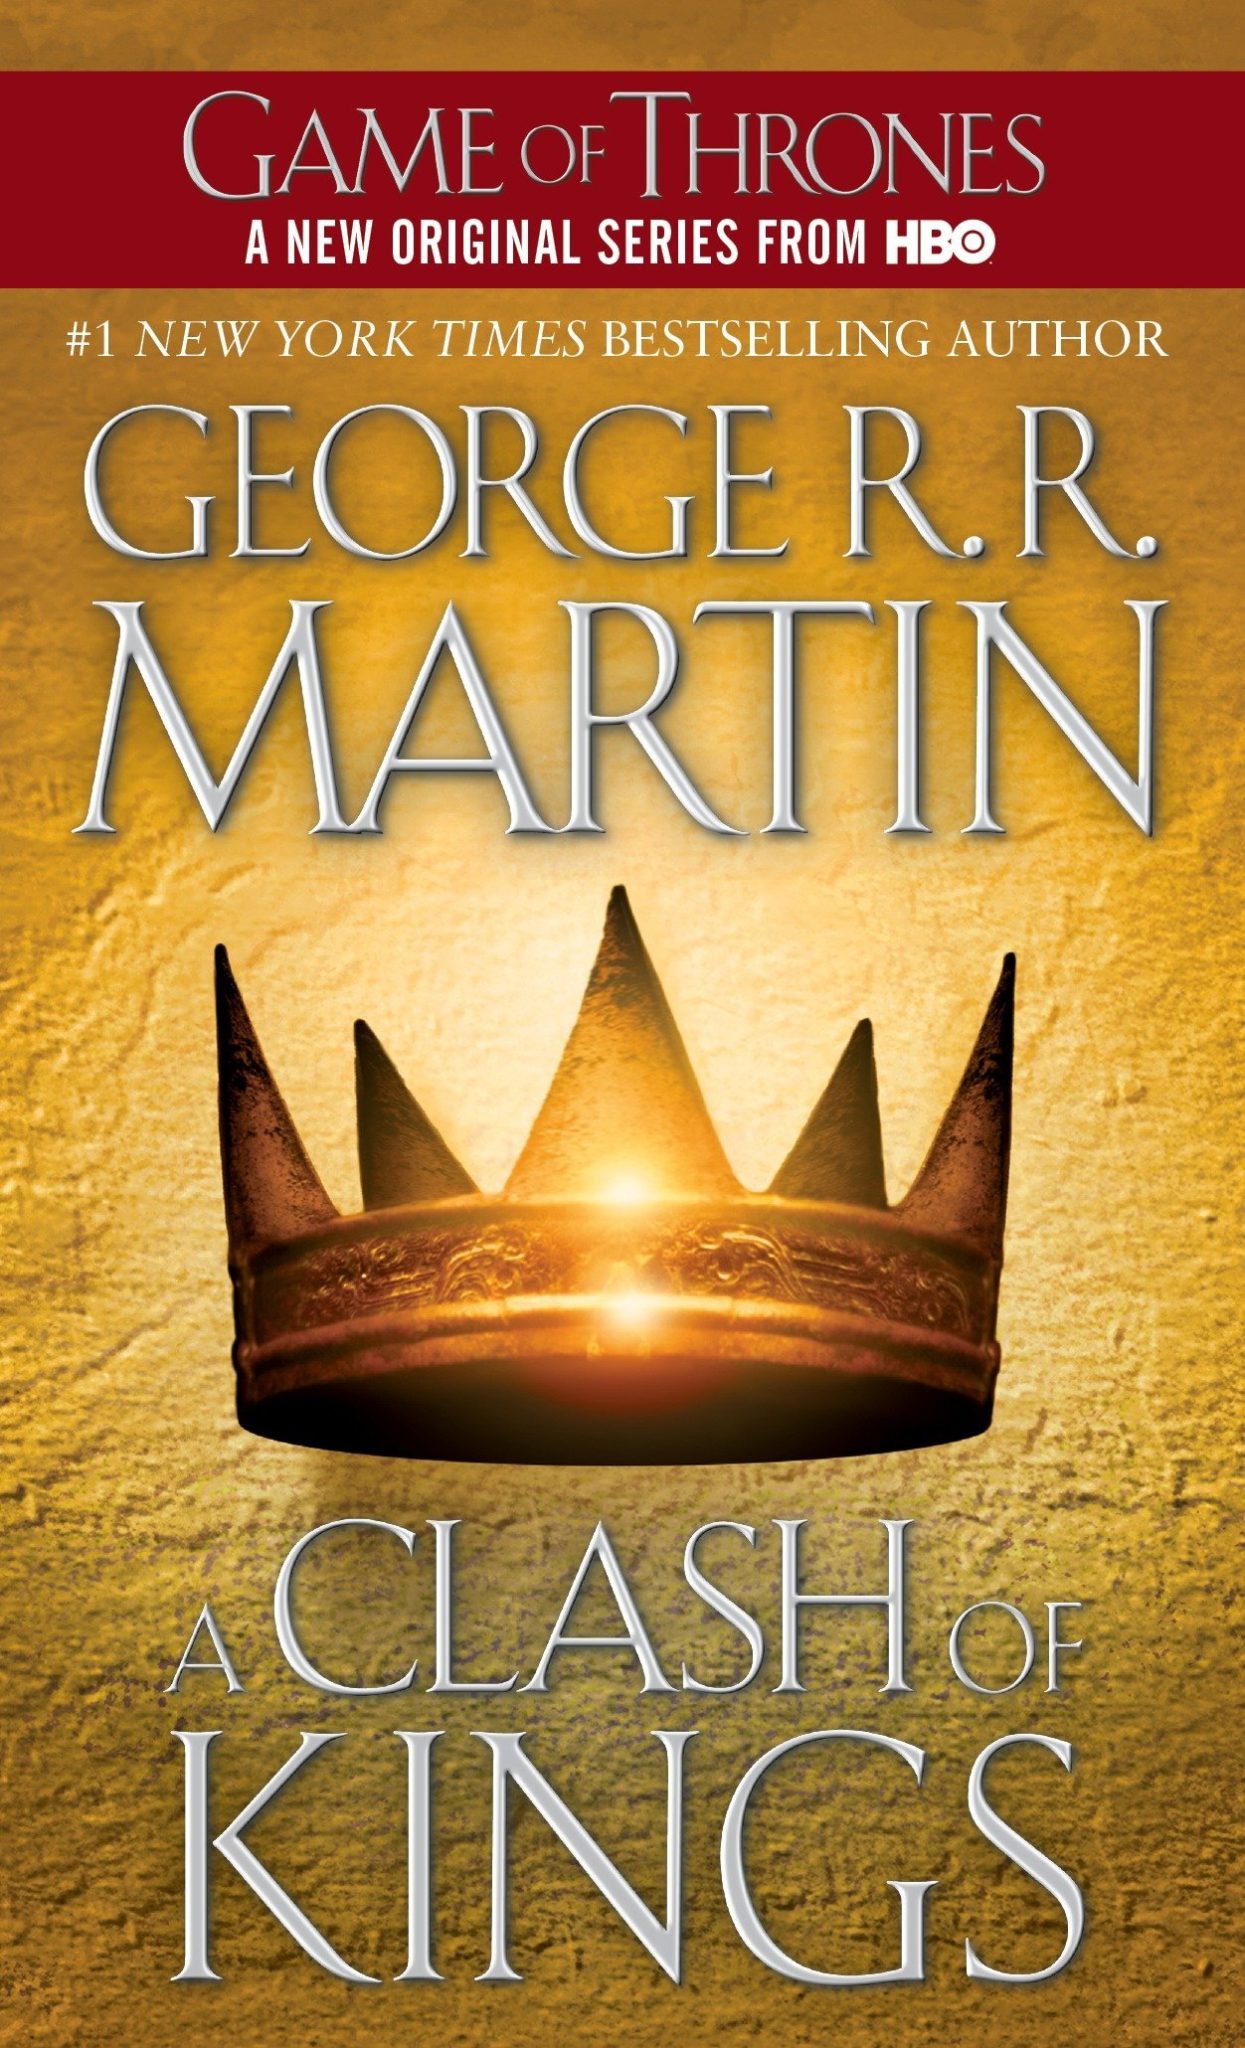 Game of Thrones Book 2